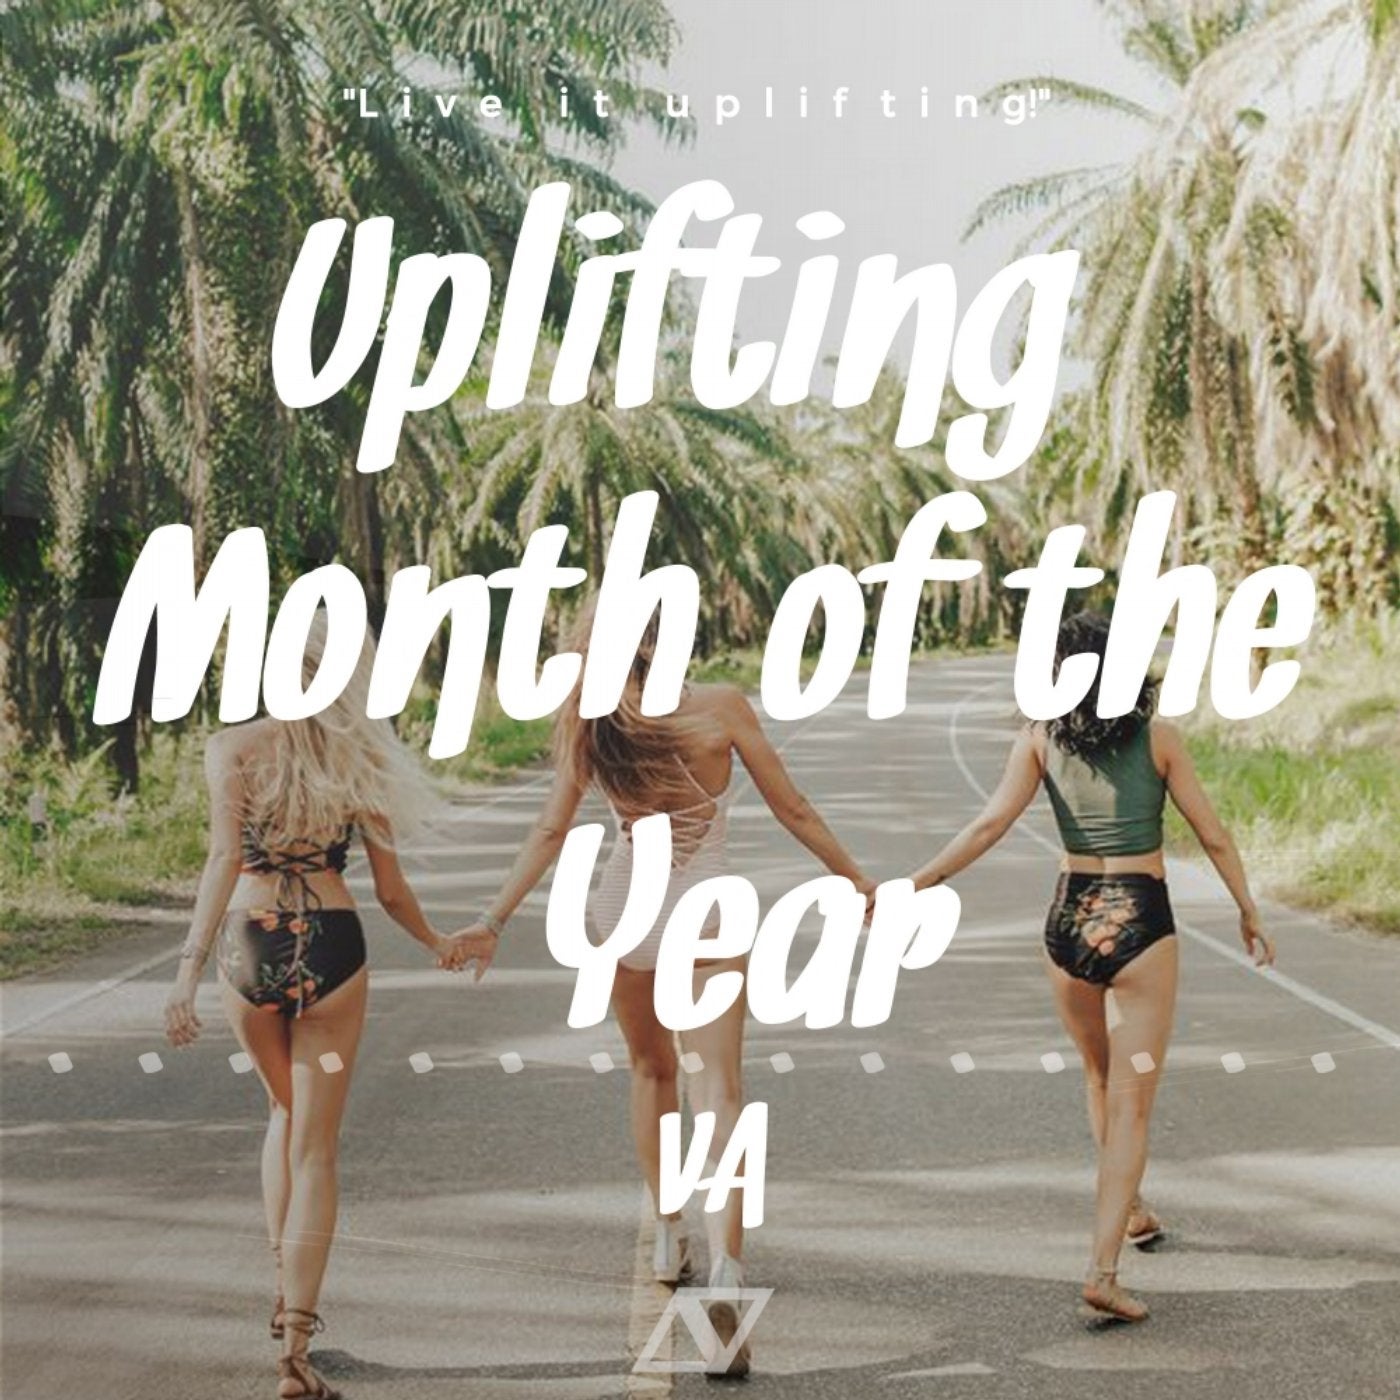 Uplifting Month of The Year VA